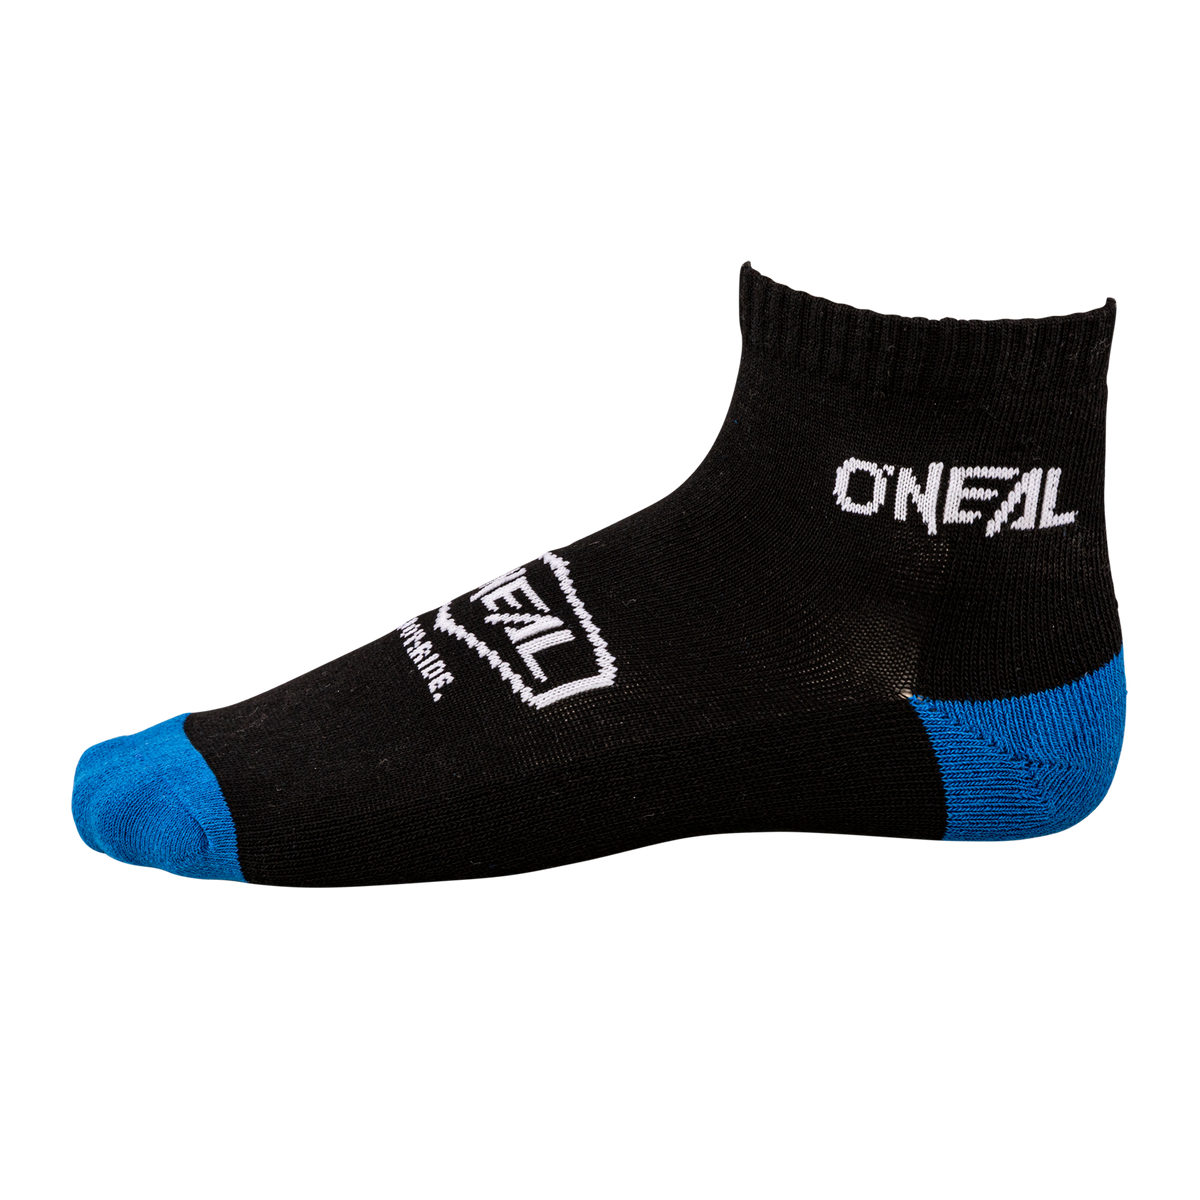 https://cdn.oneal.eu/assets/importedProductImages/ACCESSORIES/CREW%20SOCKS/ICON/black/2019_ONeal_CREW%20SOCK_ICON_black.png